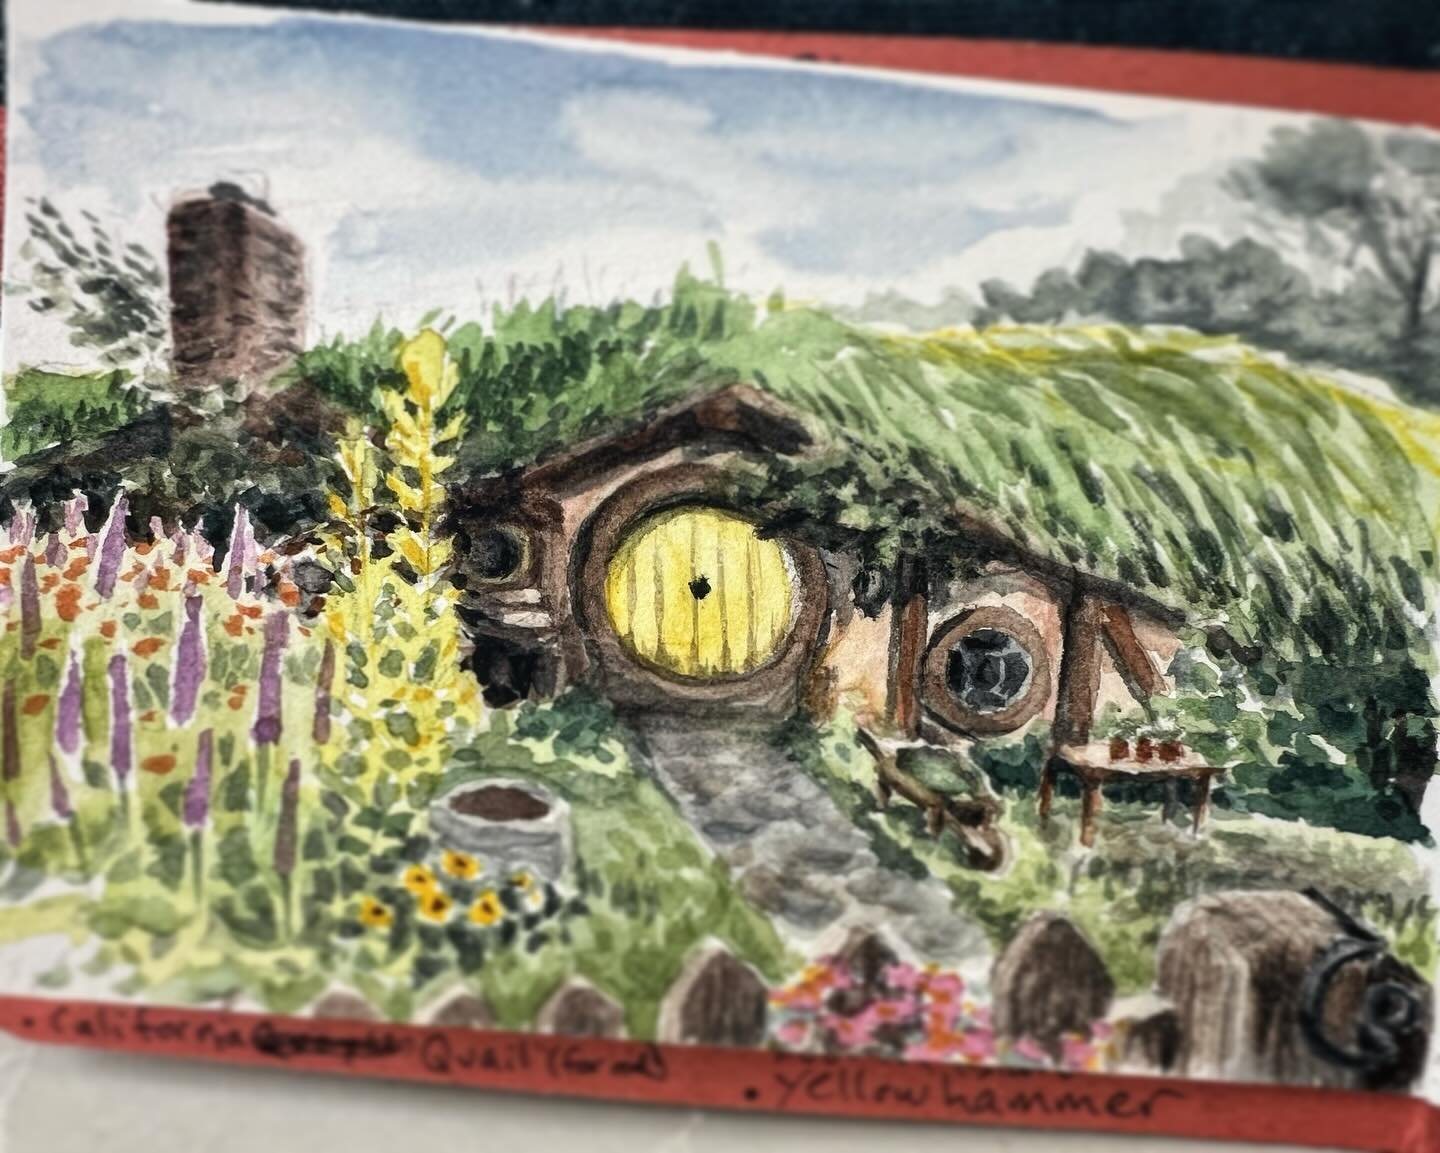 New from the sketchbook: Sam &amp; Rosie&rsquo;s hobbit hole #travelsketchbook #watercolorsketch